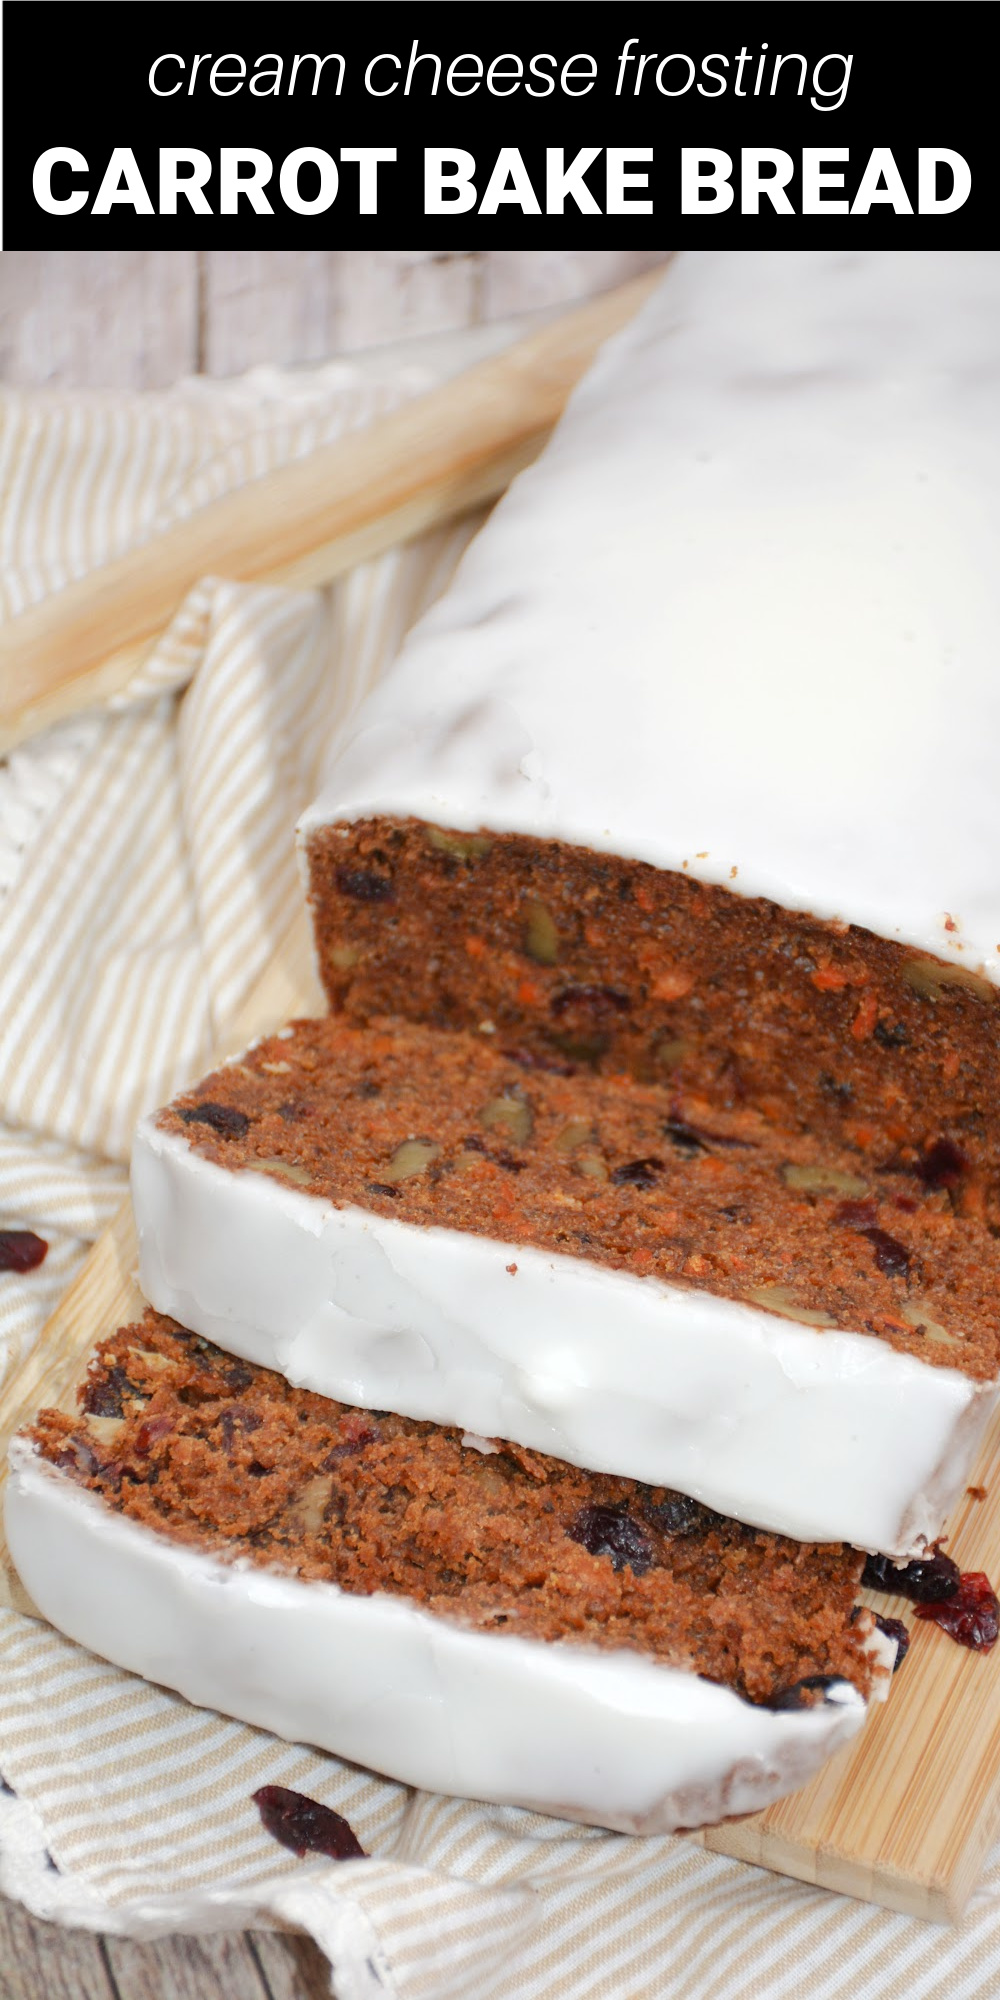 This is the best recipe for making a quick bread carrot cake loaf from scratch with simple ingredients you can easily find in your pantry. This moist carrot cake bread is great to have for dessert, a sweet treat or you could even try it for breakfast! You know you want to!